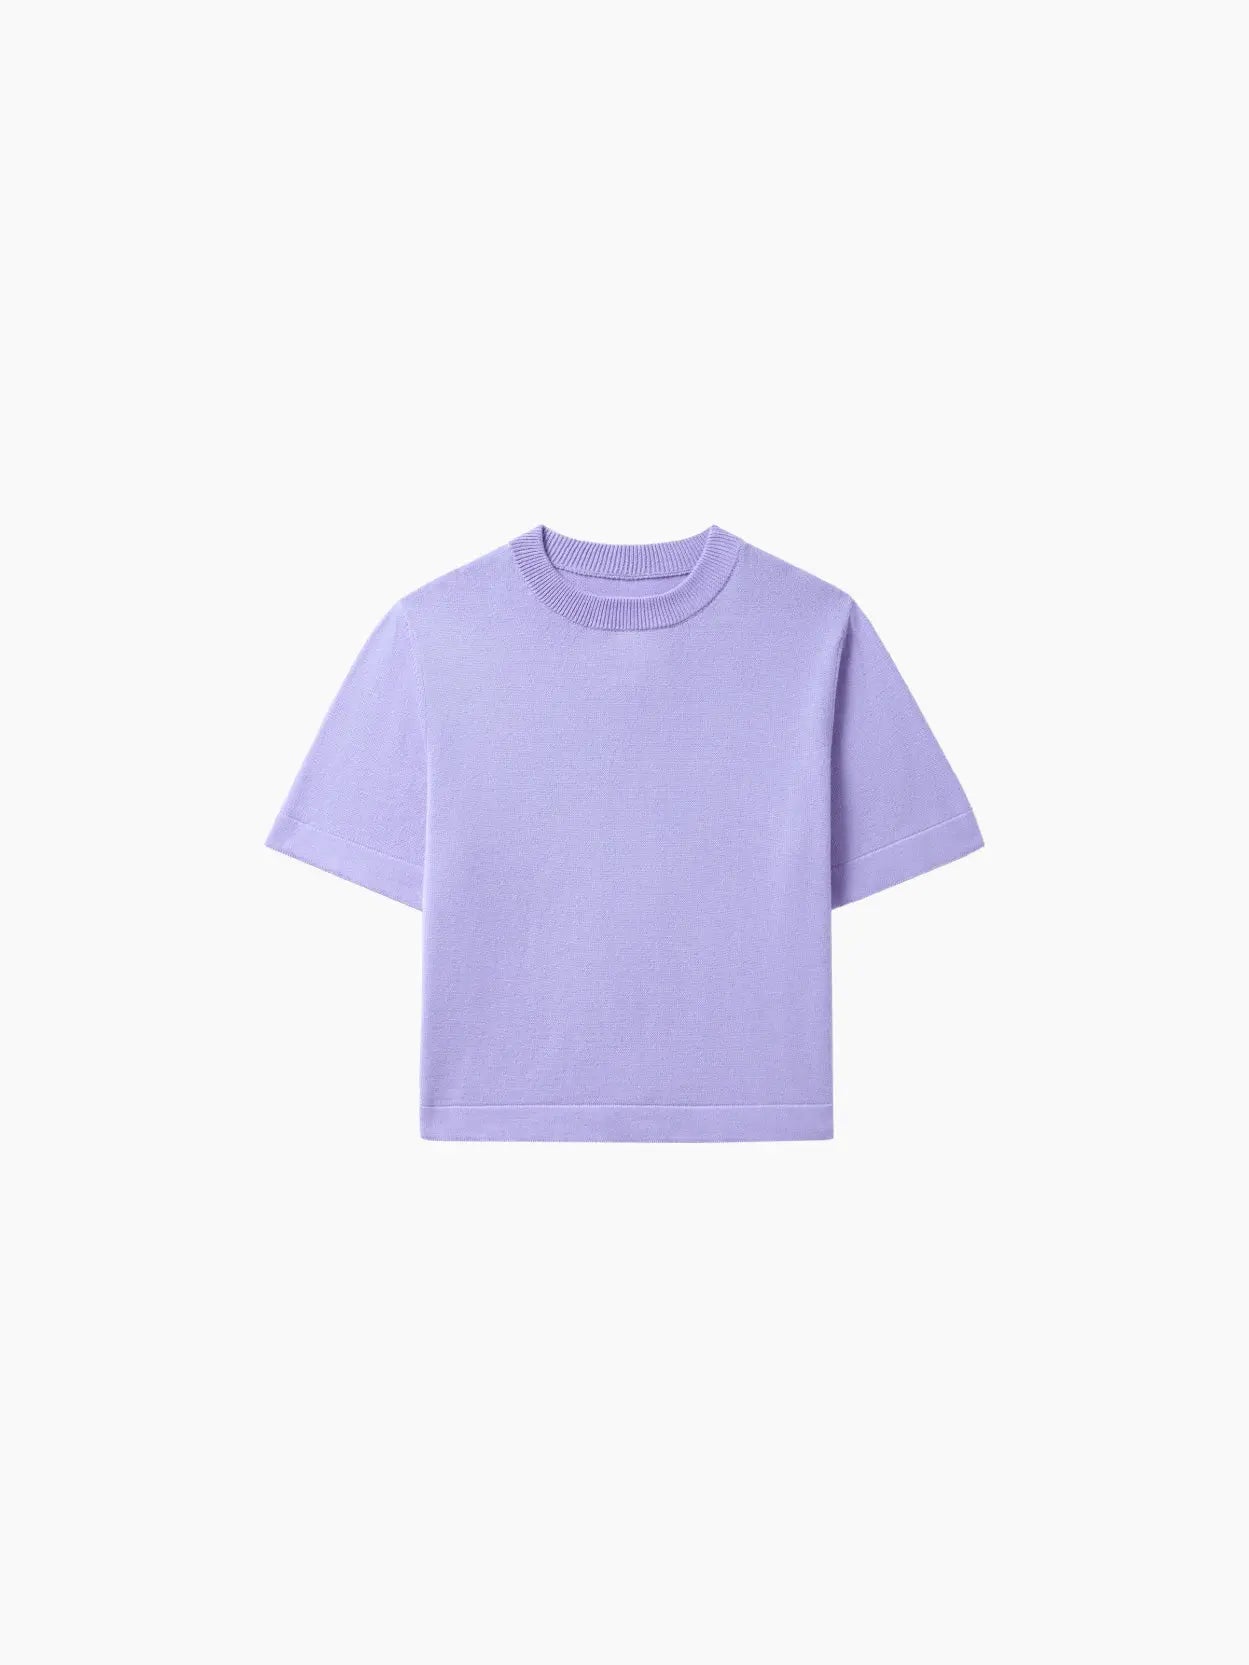 A plain, short-sleeved, light purple **Cotton T-Shirt Cardo** from **Cordera** is displayed against a white background. The shirt features a round neckline and a simple, casual design with no visible logos or patterns, perfect for everyday wear.